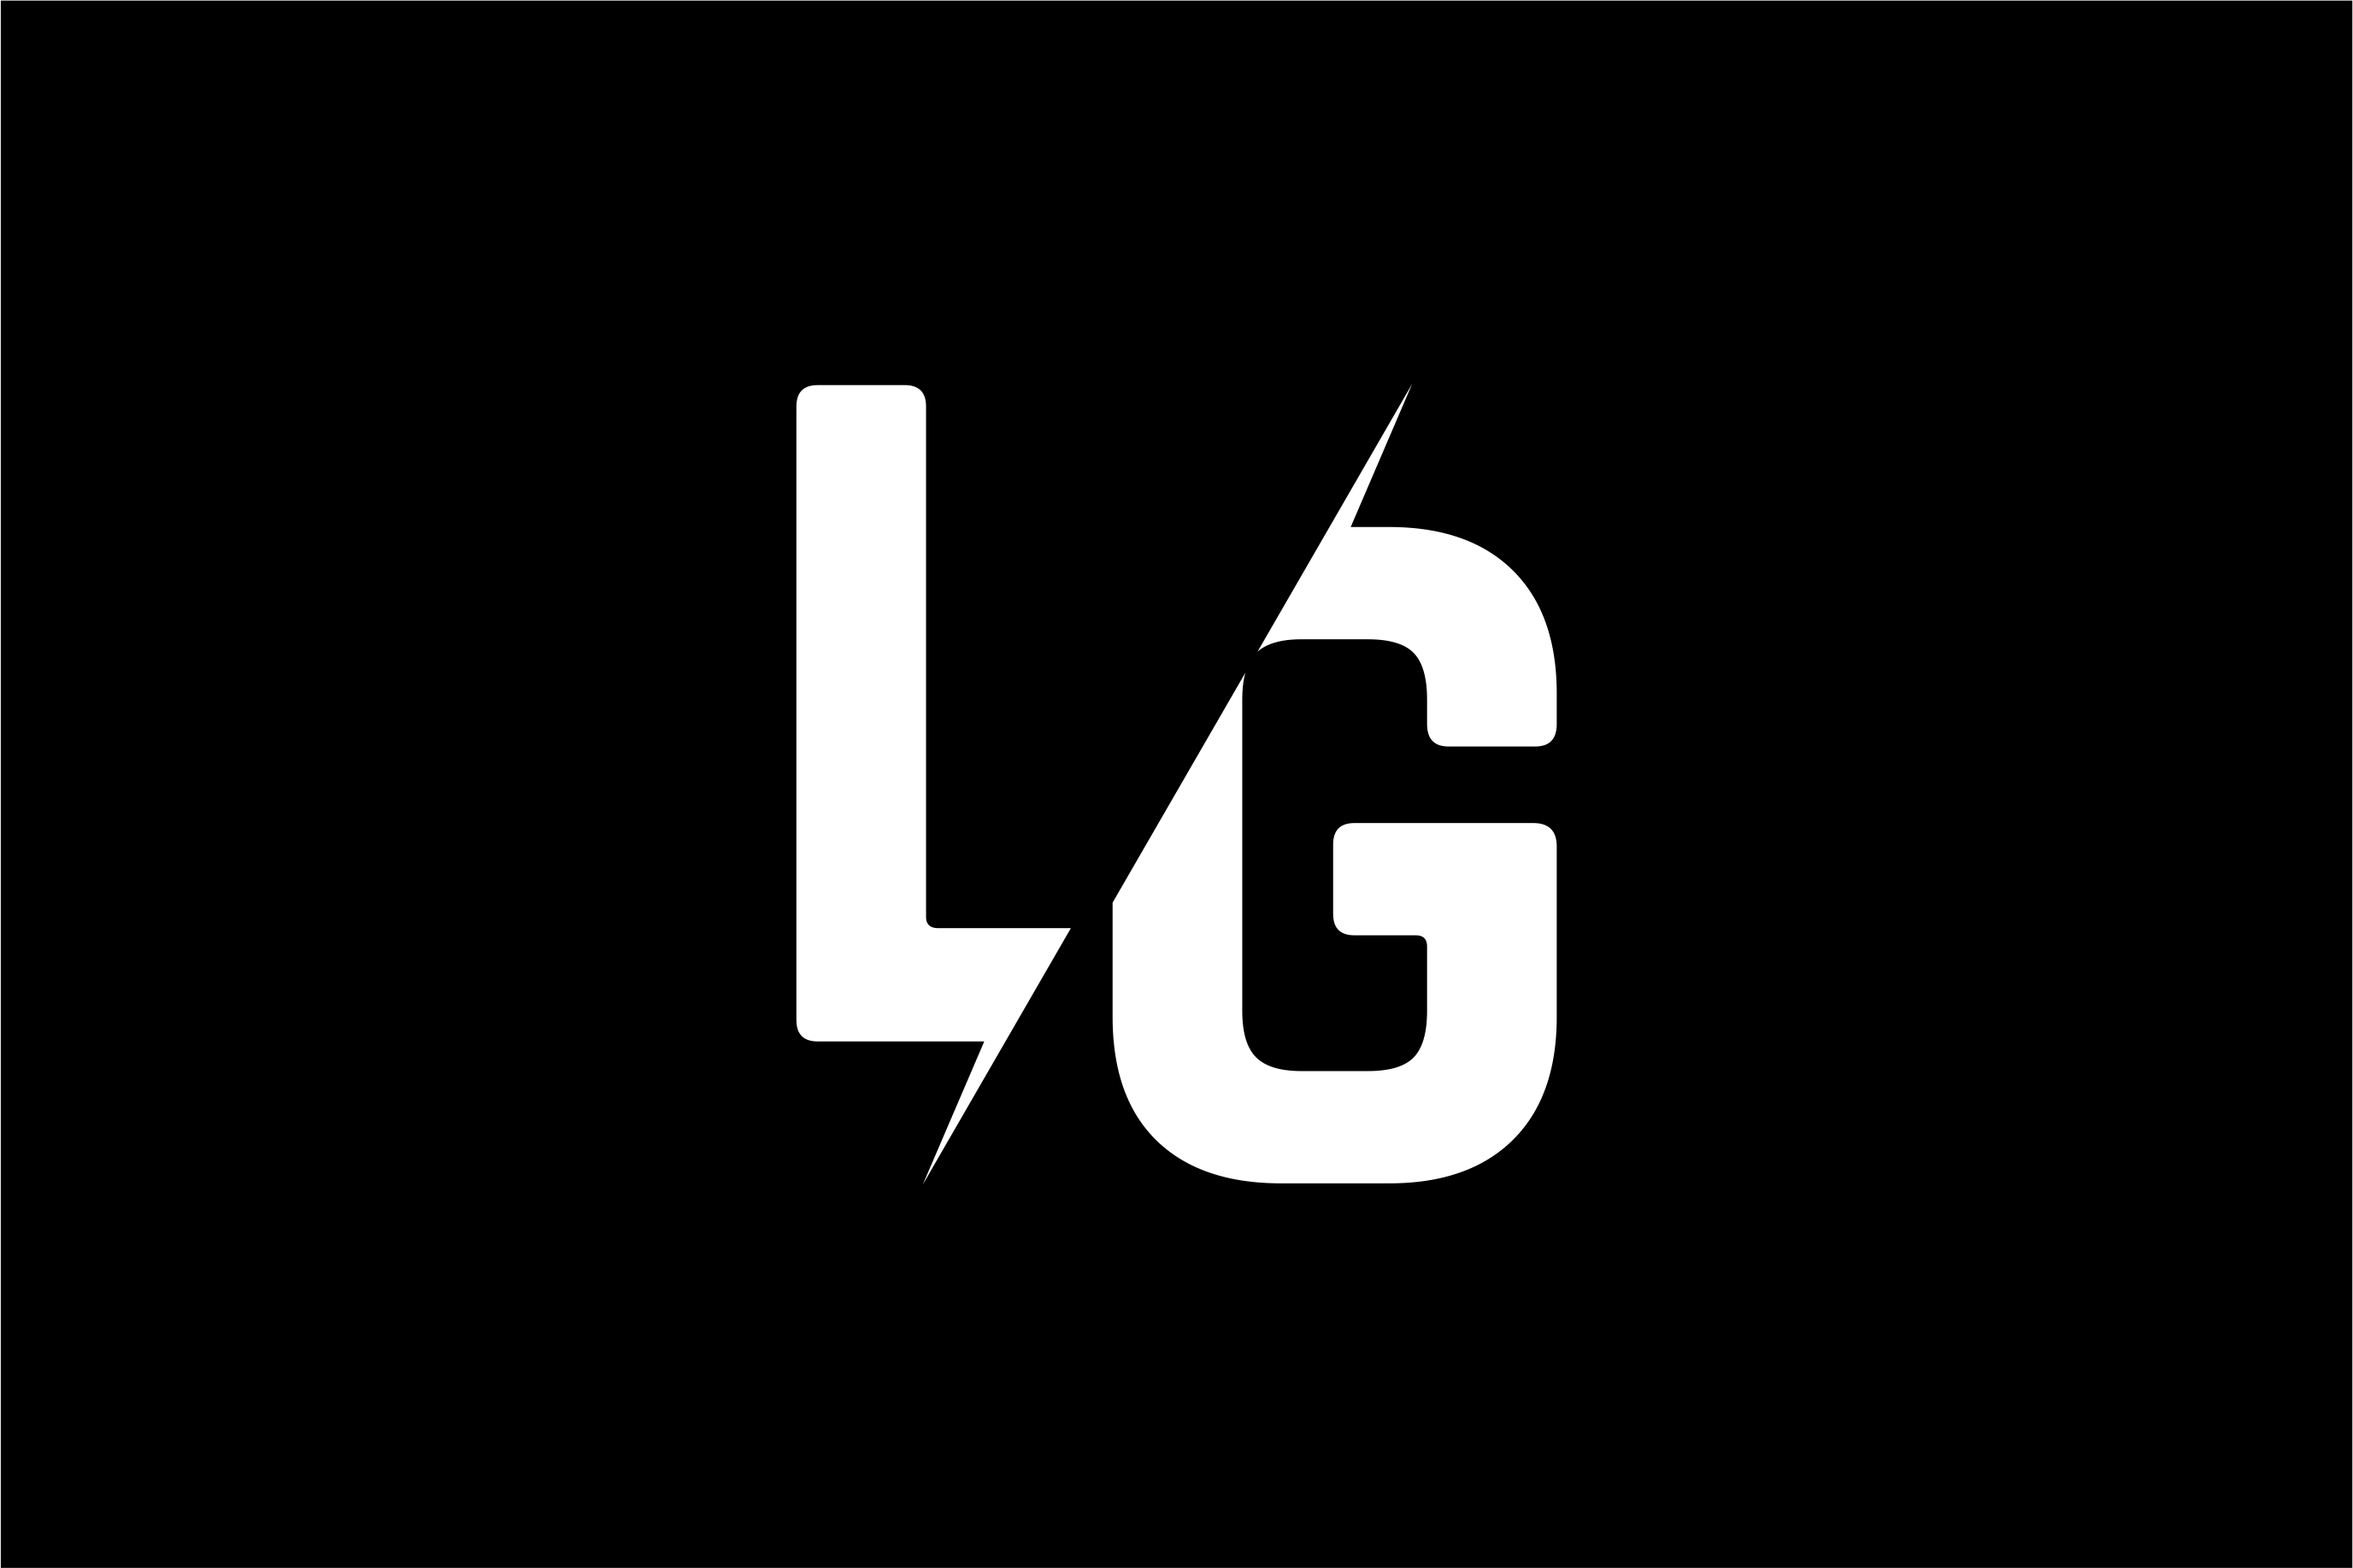 LG Logo Design Simplified with Just 4 circles, 7 Rectangles and 1 Square -  How To Design LG Logo 